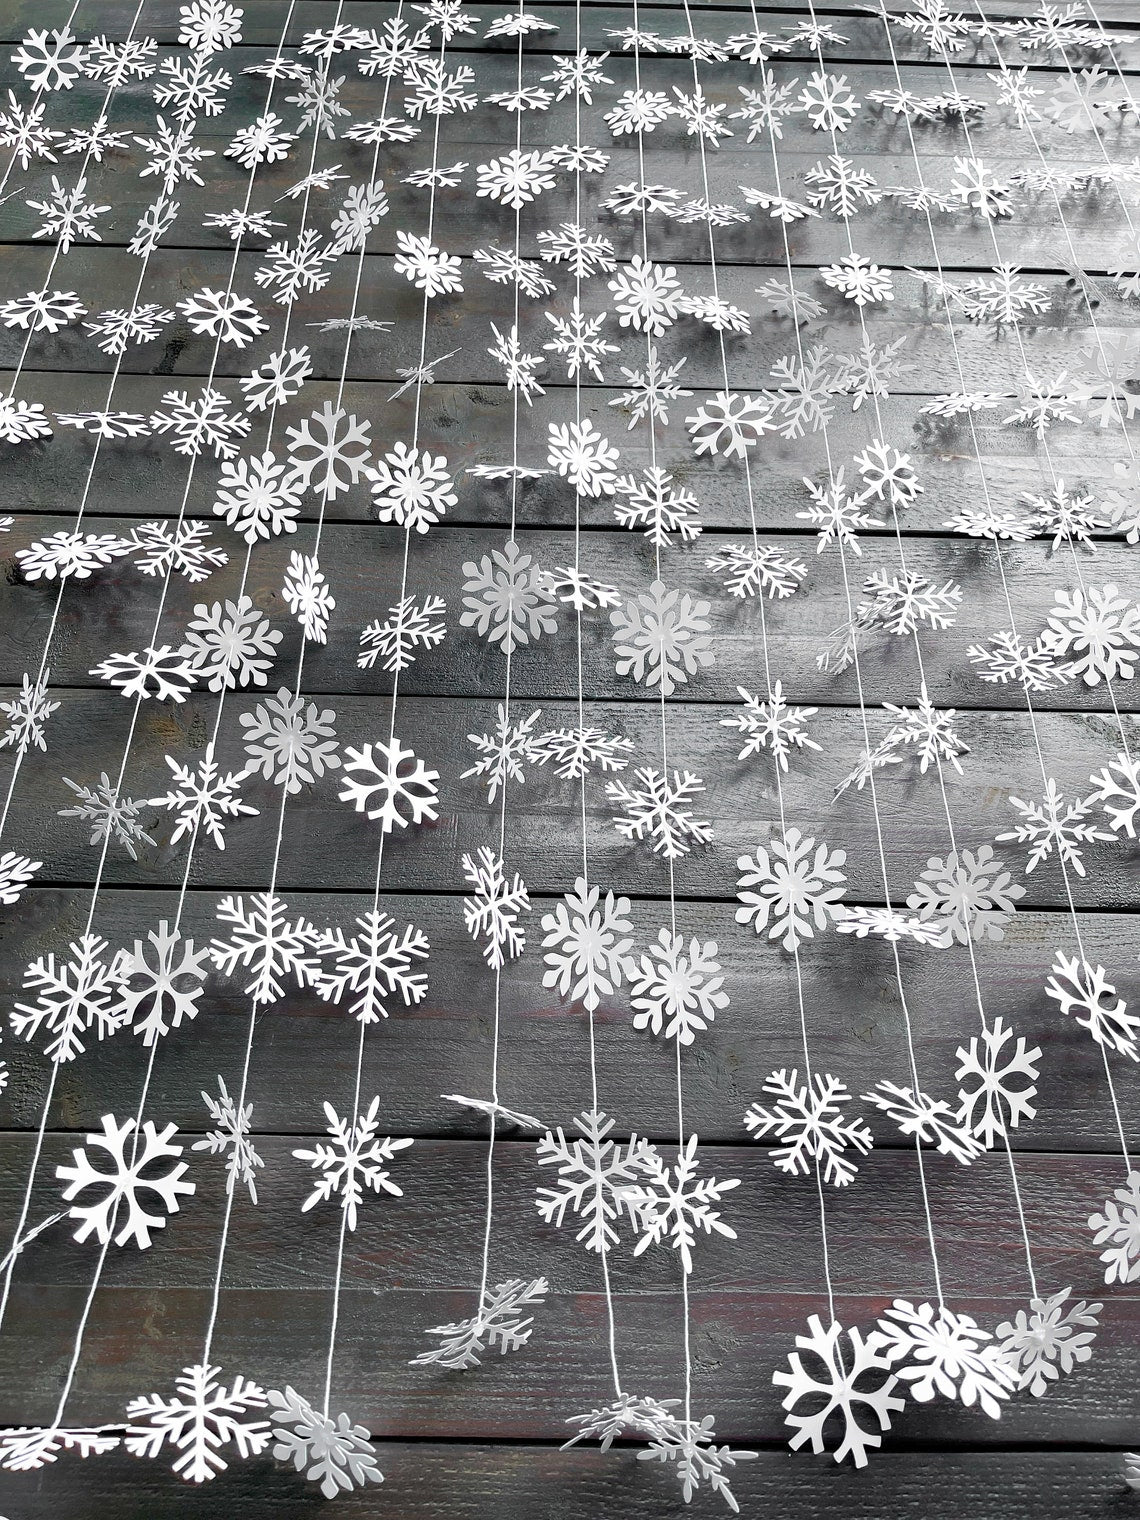 Winter Wedding, Engagement Party Decorations, Snowflake Confetti